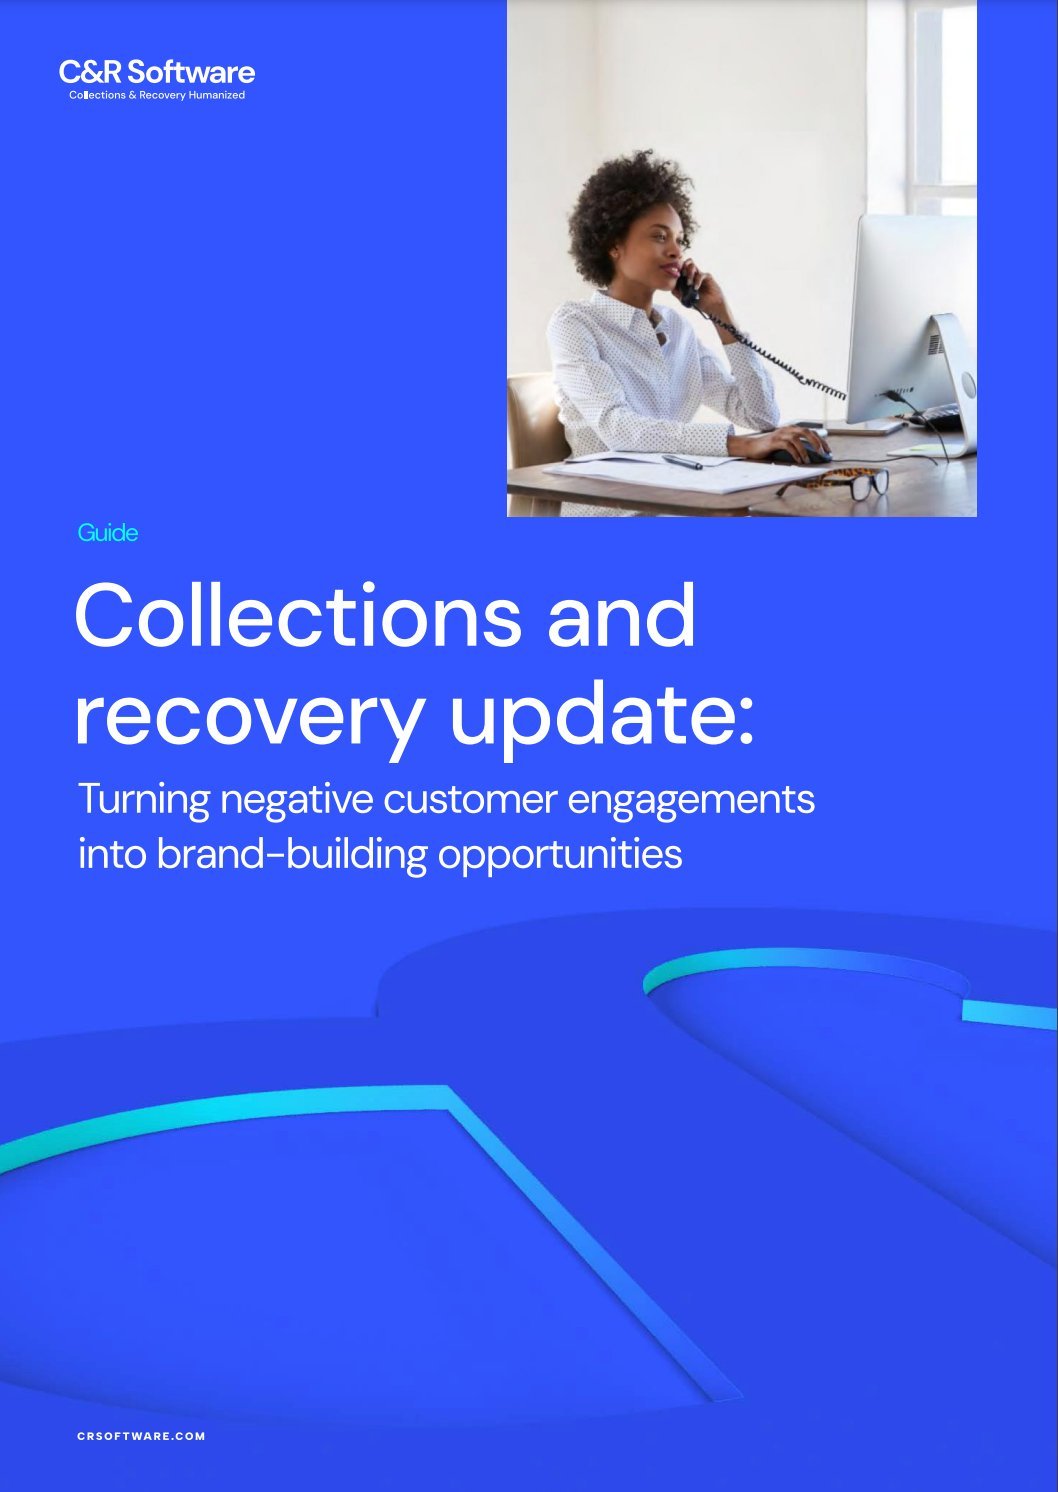 Collections and recovery update guide cover